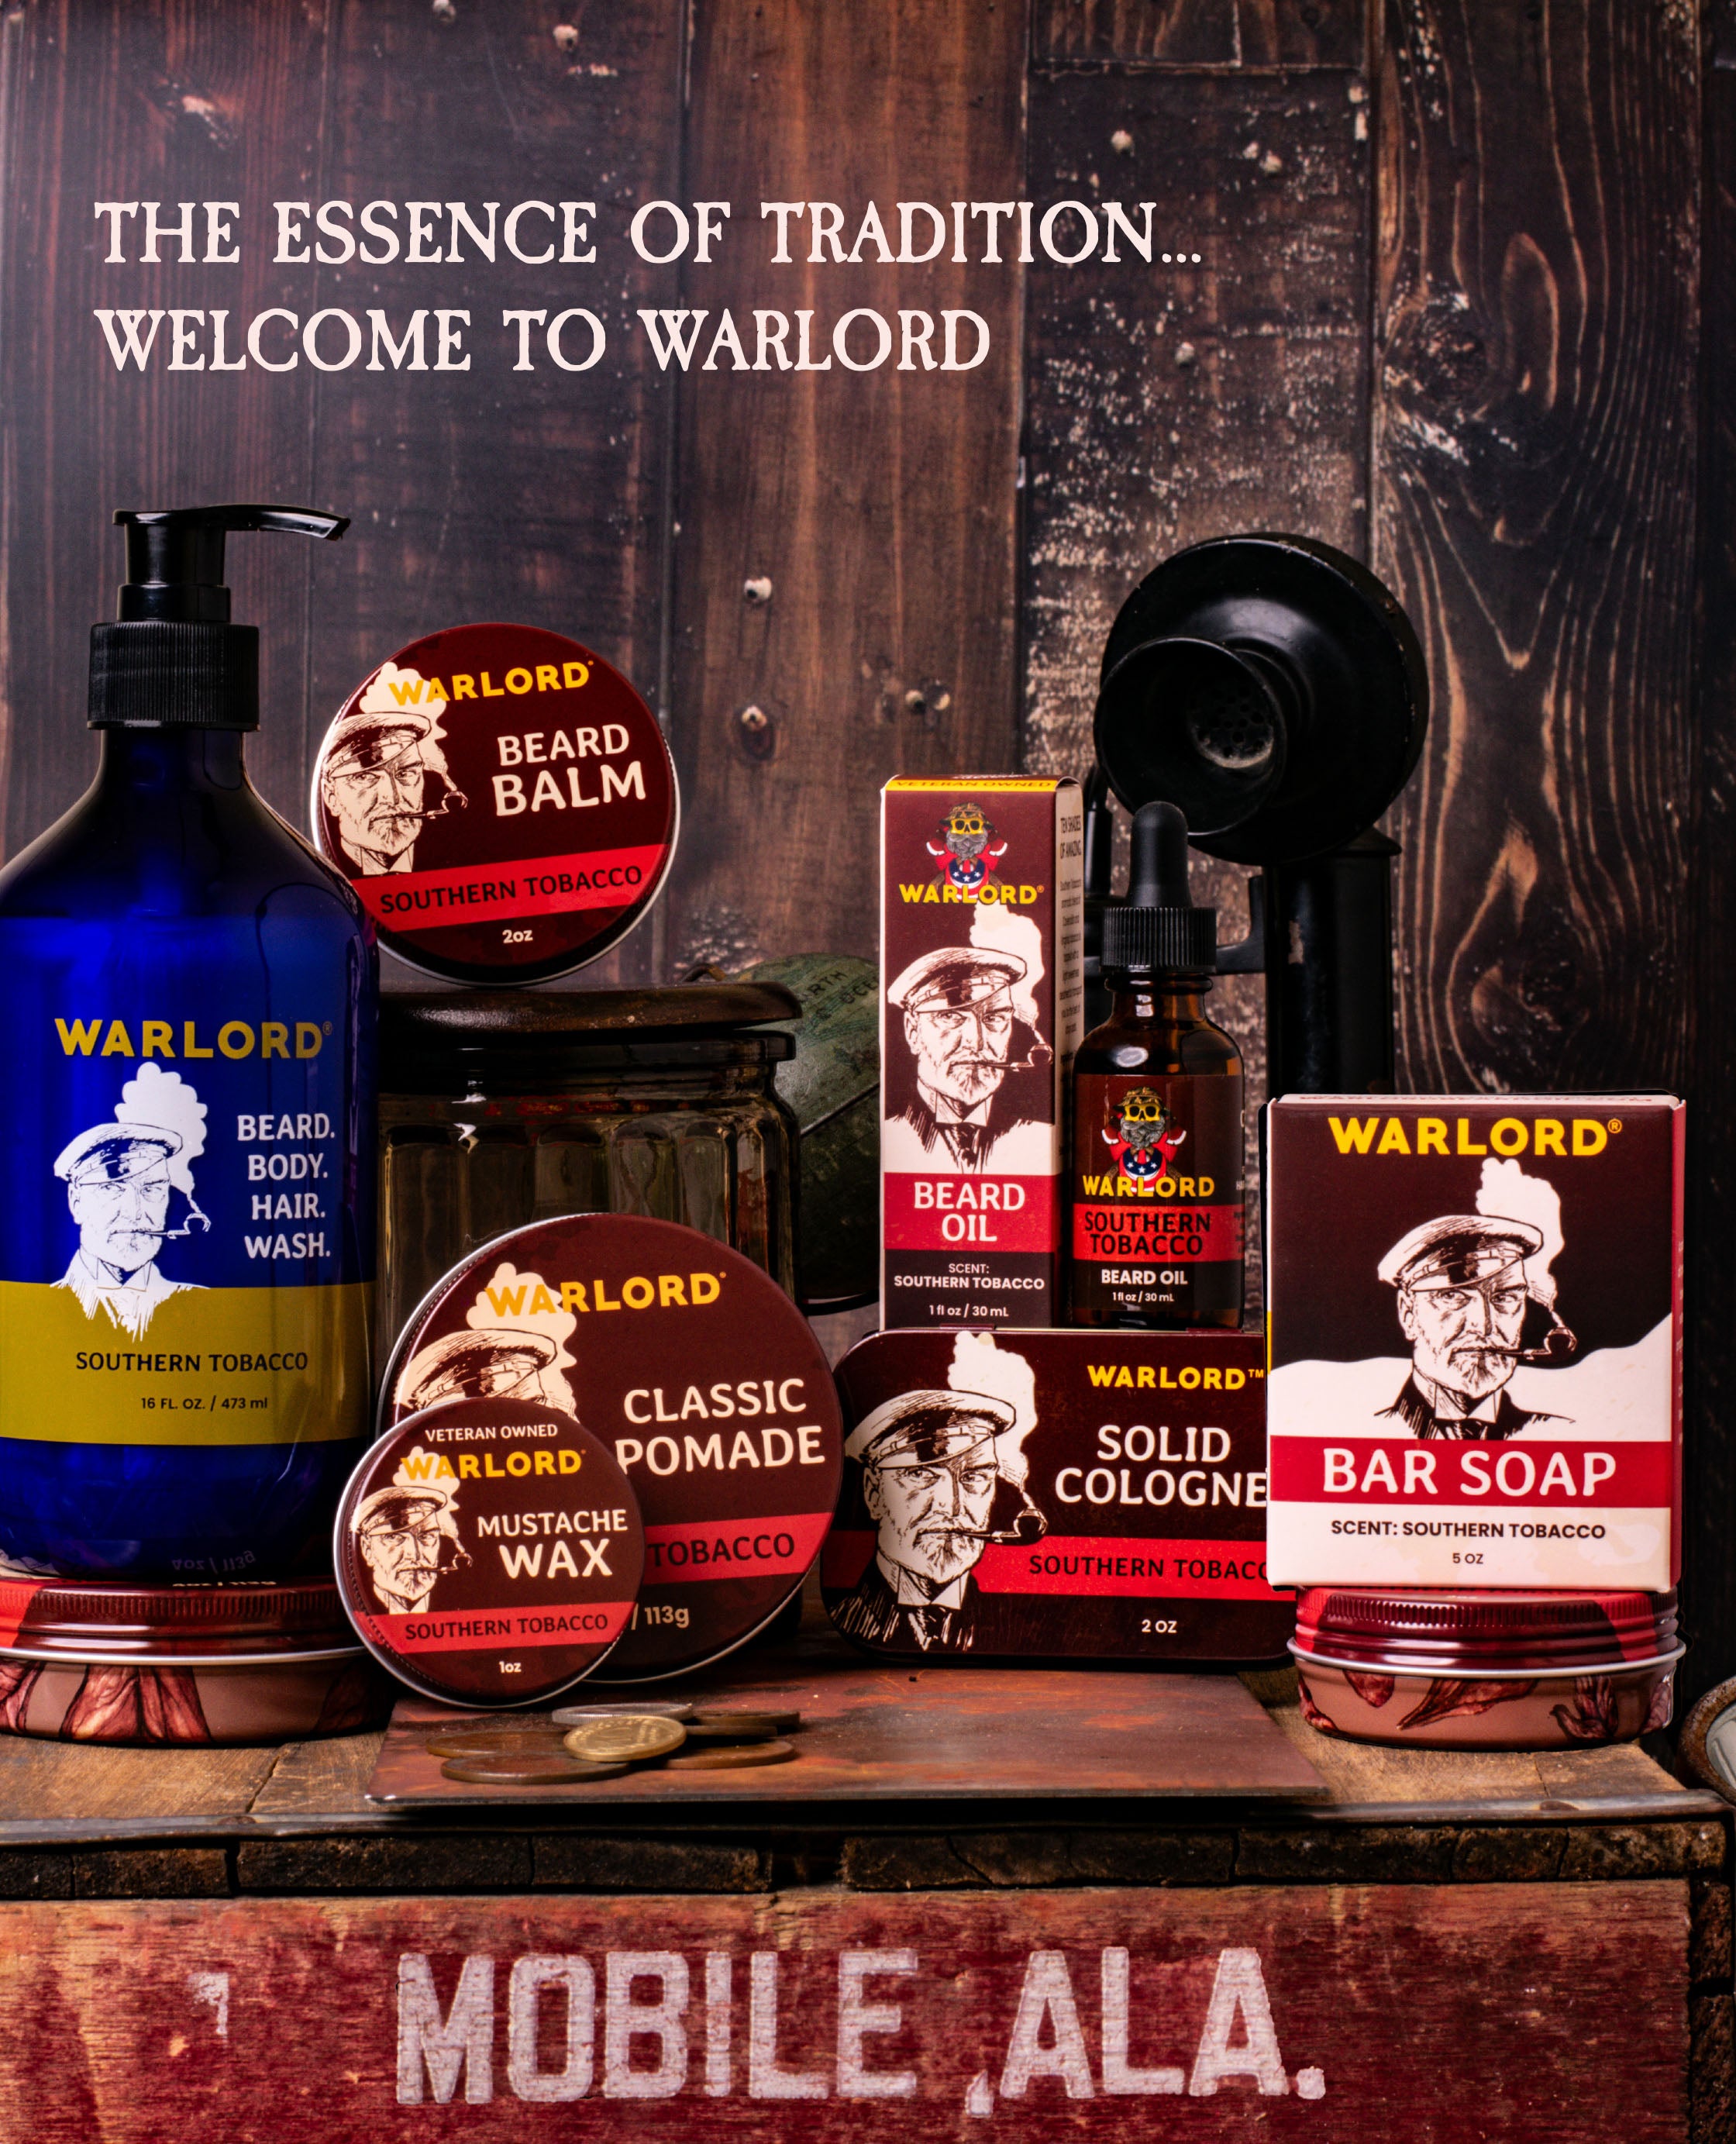 Warlord's Southern Tobacco products.